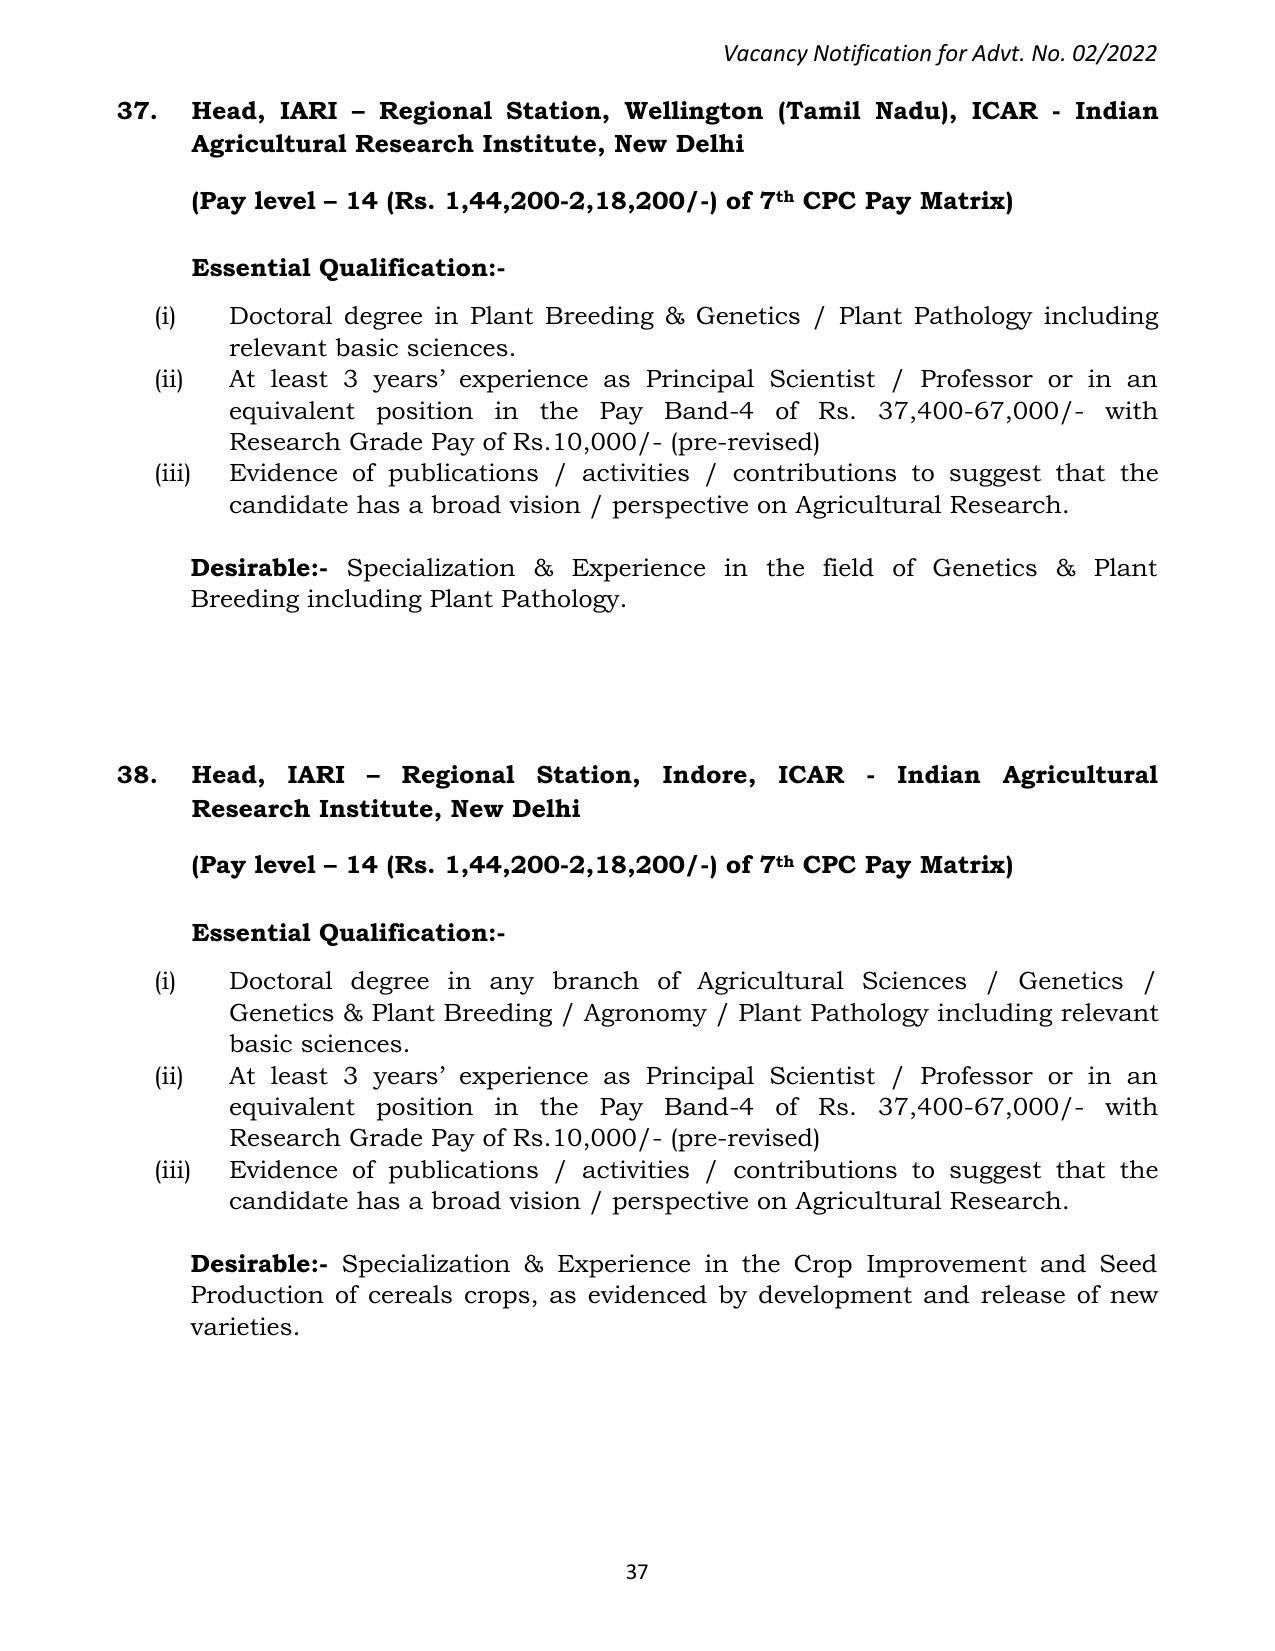 ASRB Non-Research Management Recruitment 2022 - Page 64